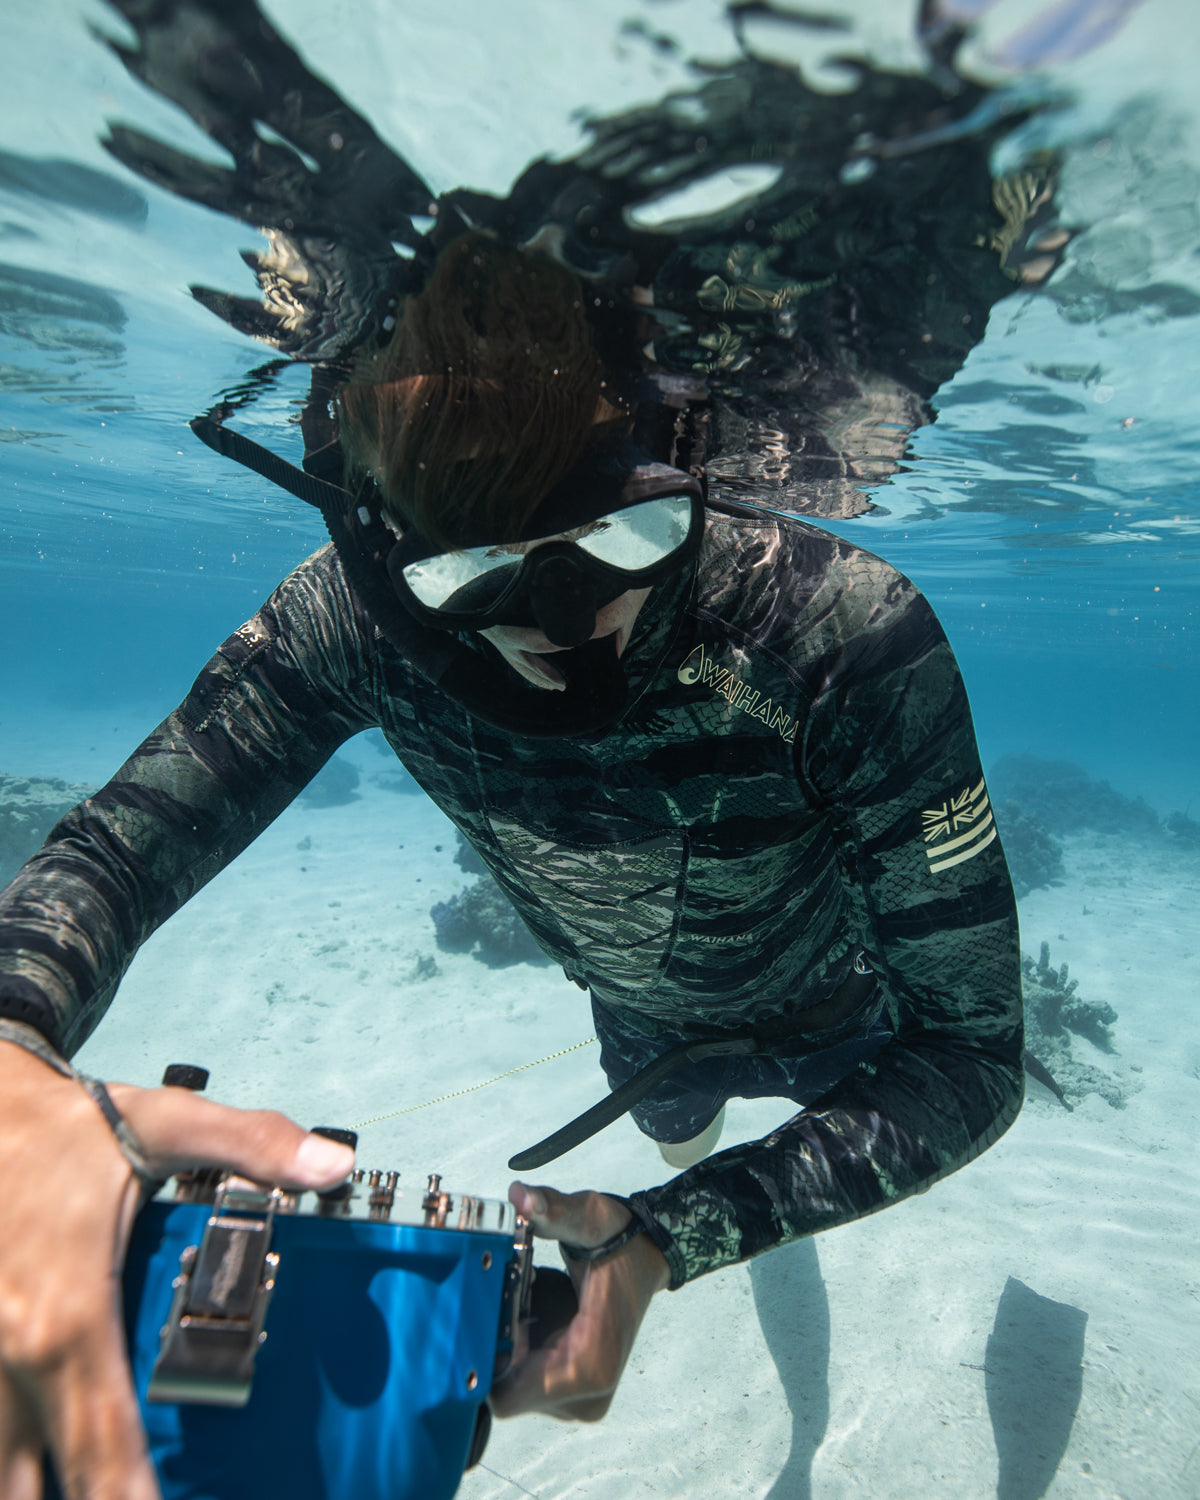 Spearfishing Camo Wetsuit Speared Apparel – Born of Water